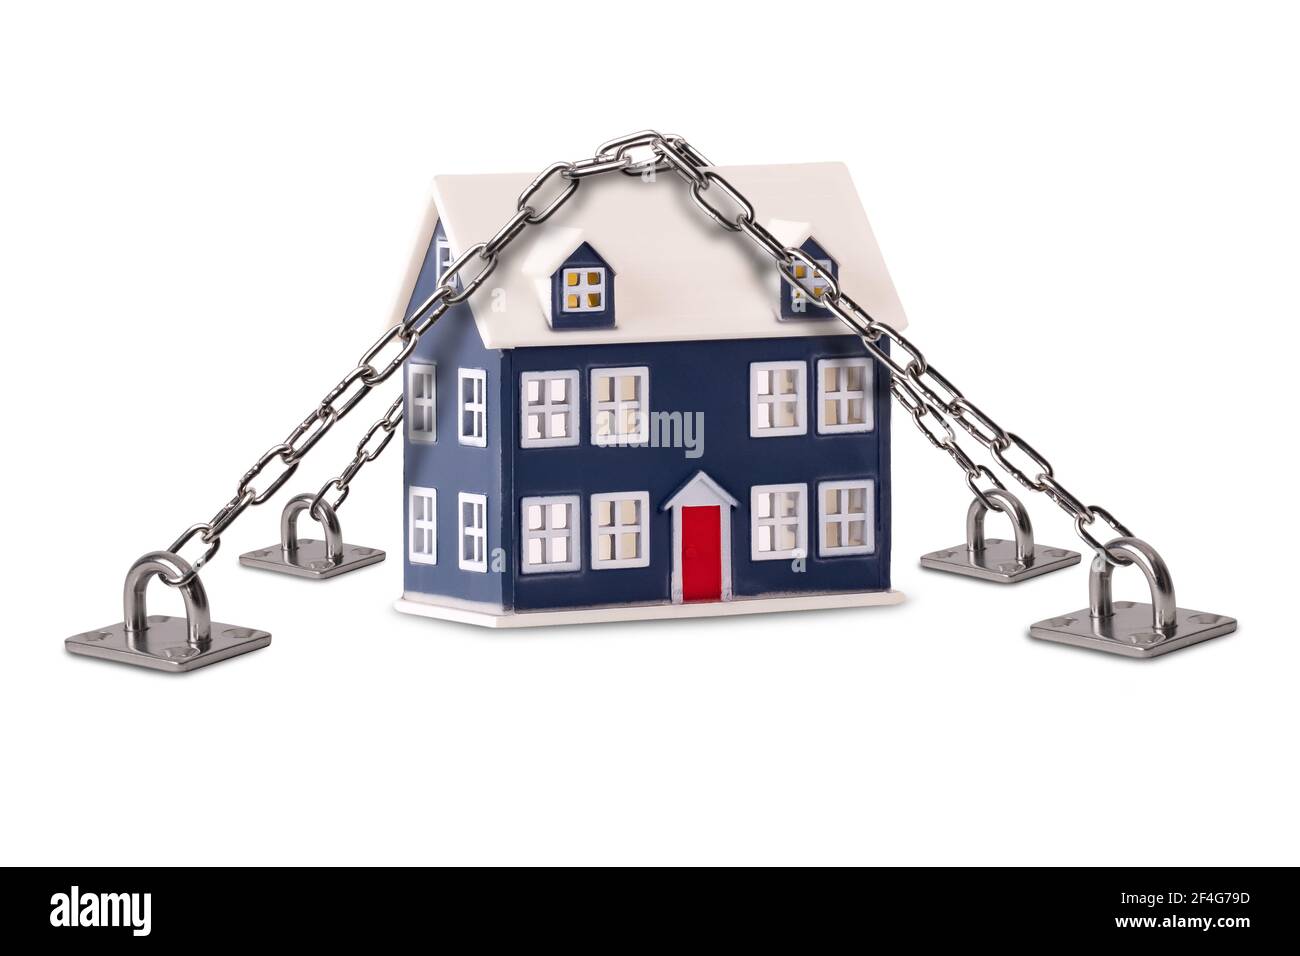 Secure house and building insurance concept. Home security protection with a tiny house chained and locked down on a isolated white background Stock Photo